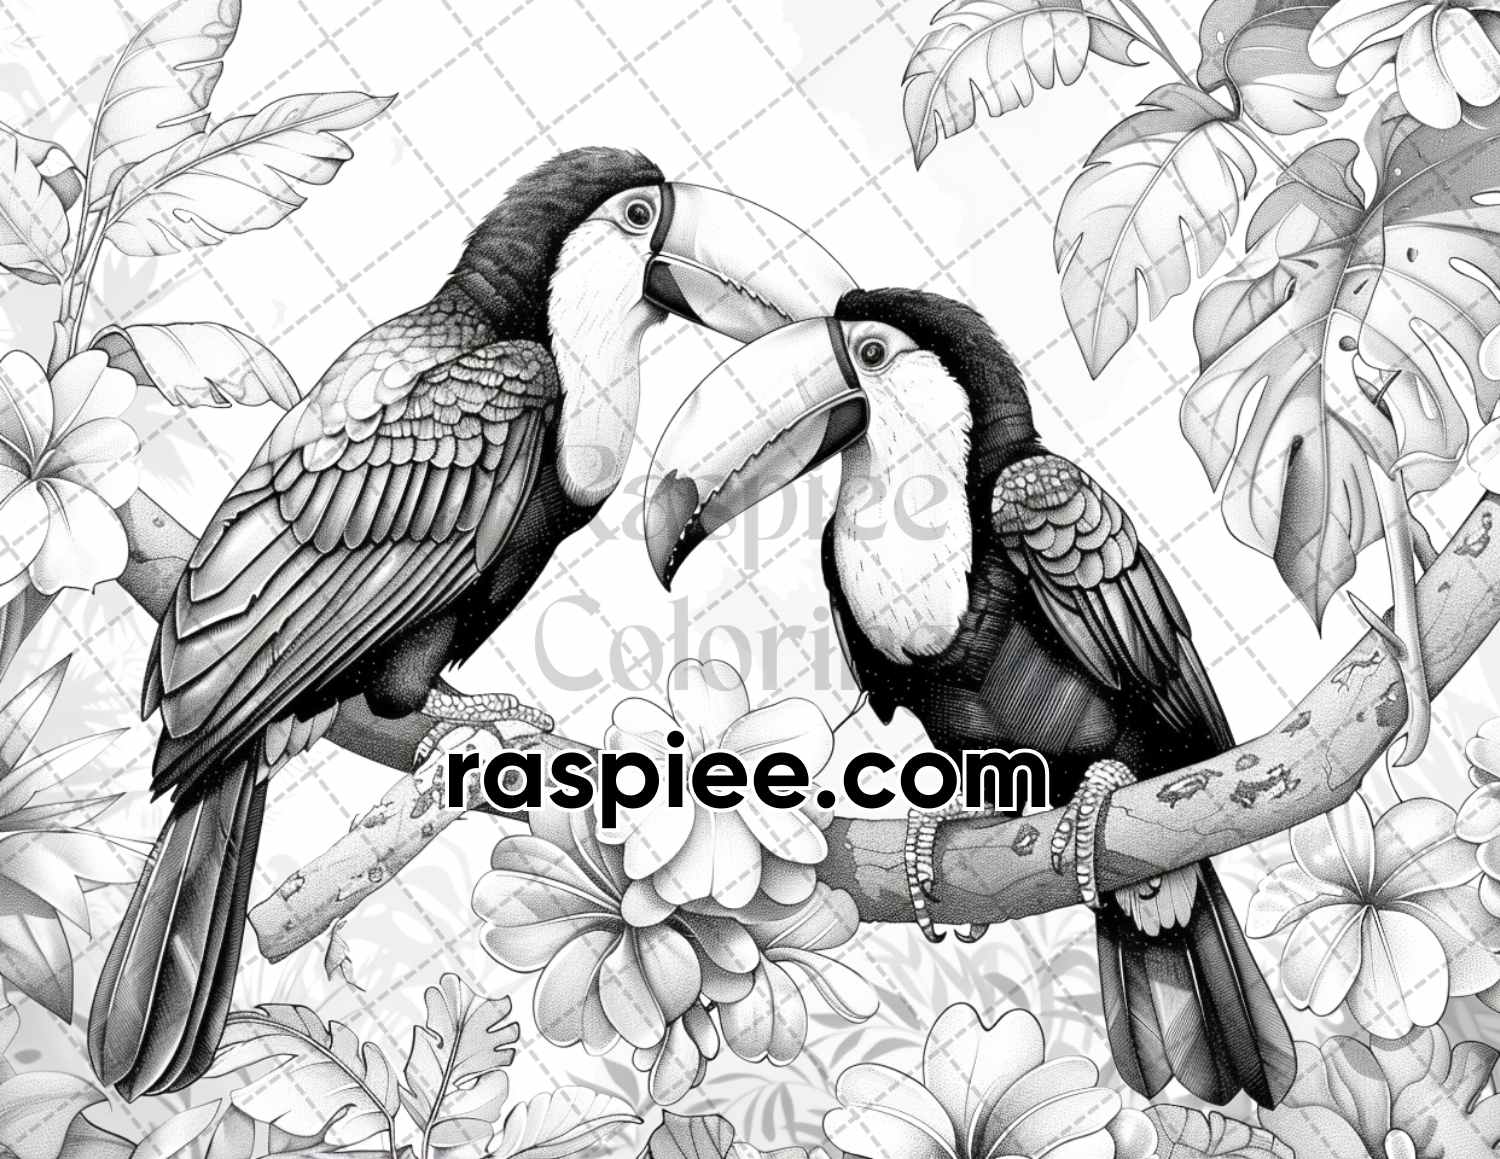 adult coloring pages, adult coloring sheets, adult coloring book pdf, adult coloring book printable, grayscale coloring pages, grayscale coloring books, landscapes coloring pages for adults, landscapes coloring book, grayscale illustration, summer coloring pages, animal coloring pages